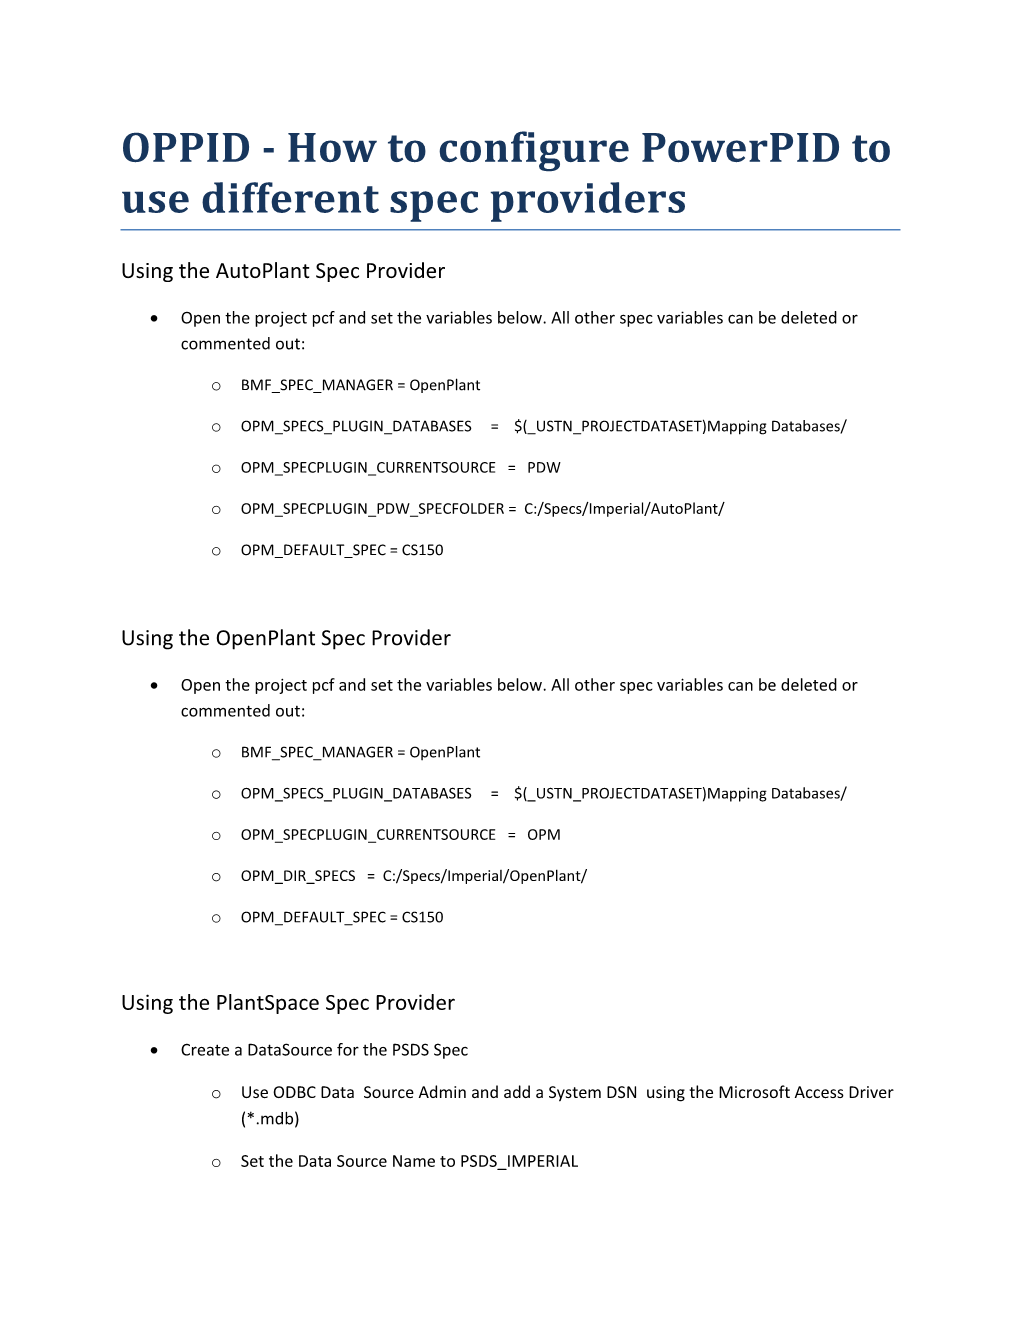 OPPID - How to Configure Powerpid to Use Different Spec Providers